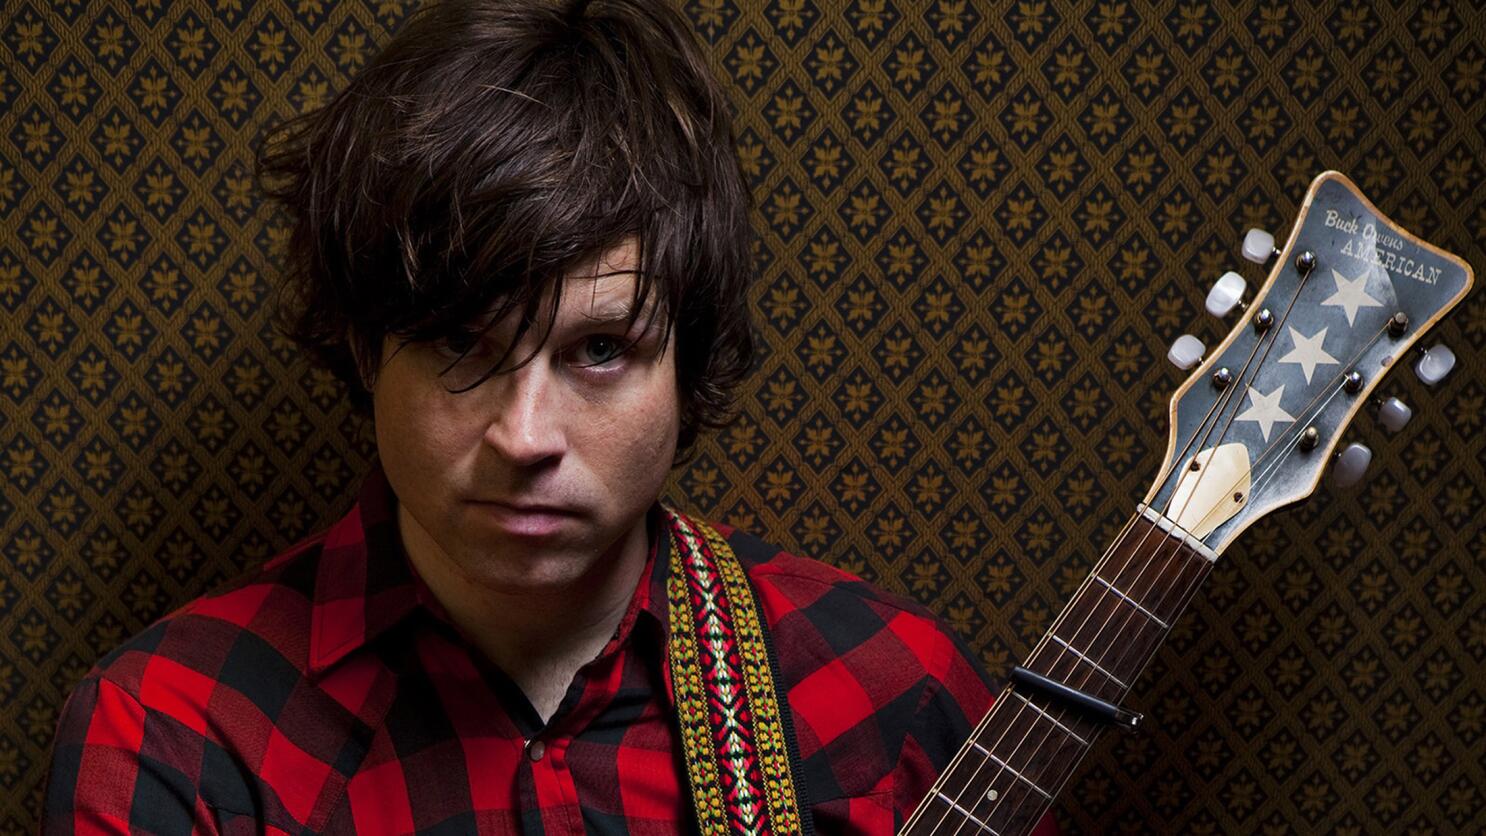 Canceled musician Ryan Adams pens apology for hurting women - Los Angeles  Times